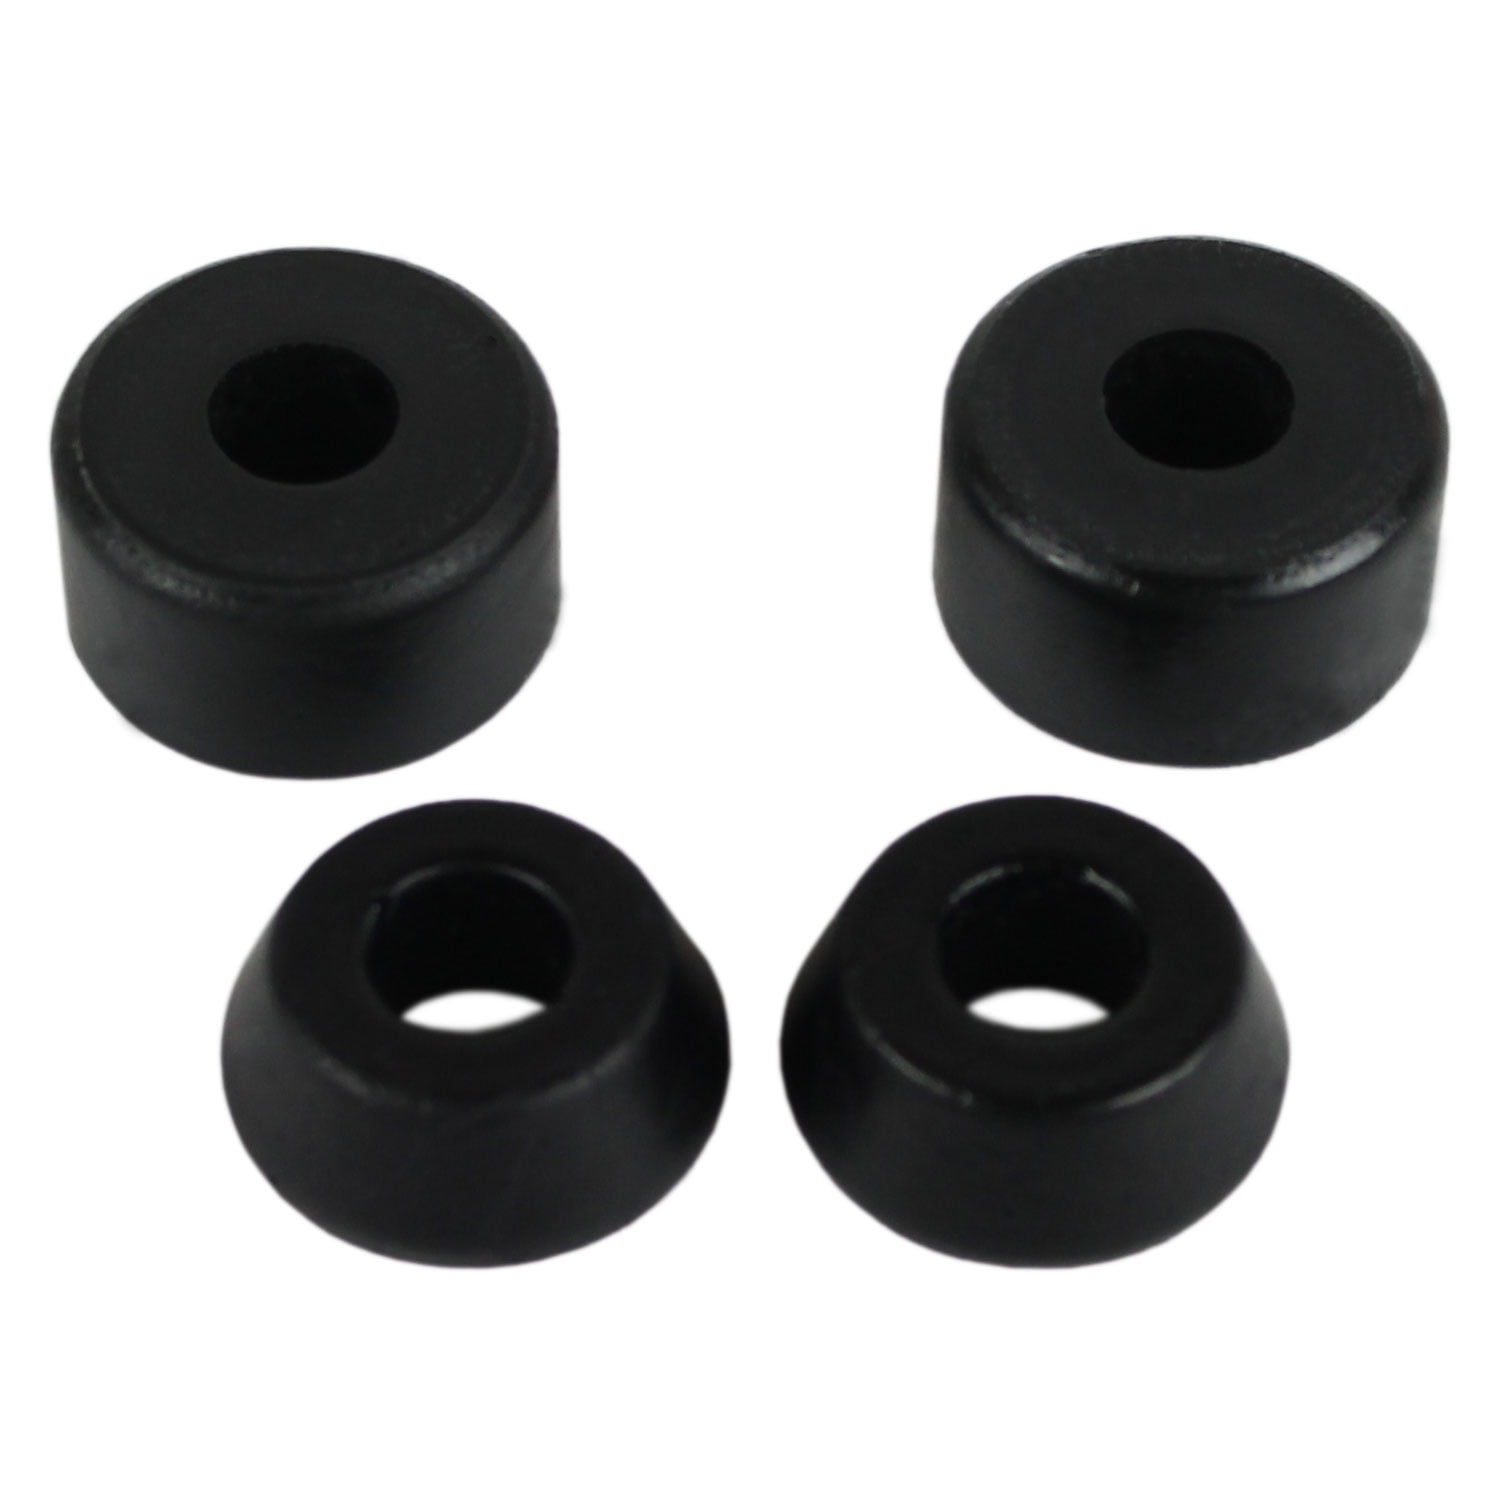 Skateboard Longboard Truck Replacement Bushings 4-pack for 2 Trucks Many and for sale online